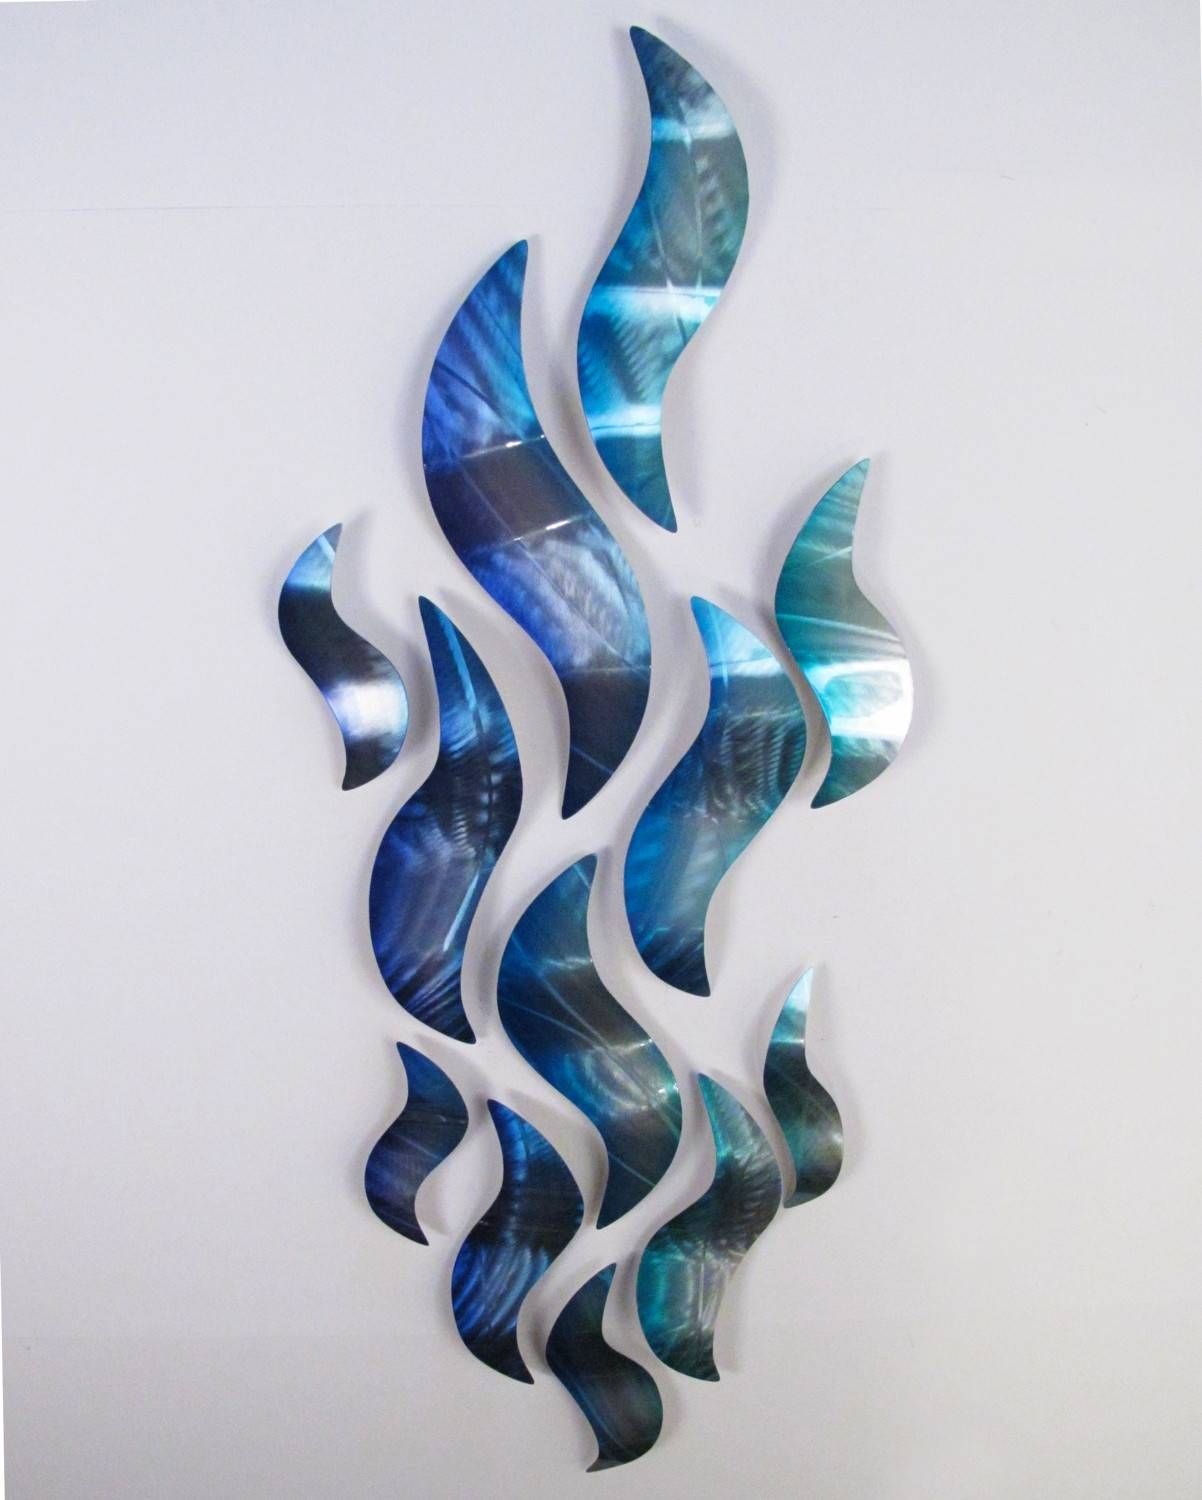 Natural About Resin Mermaid Wall Decor S To Pin On Pinsdaddy To Throughout Most Recent Mermaid Metal Wall Art (View 18 of 20)